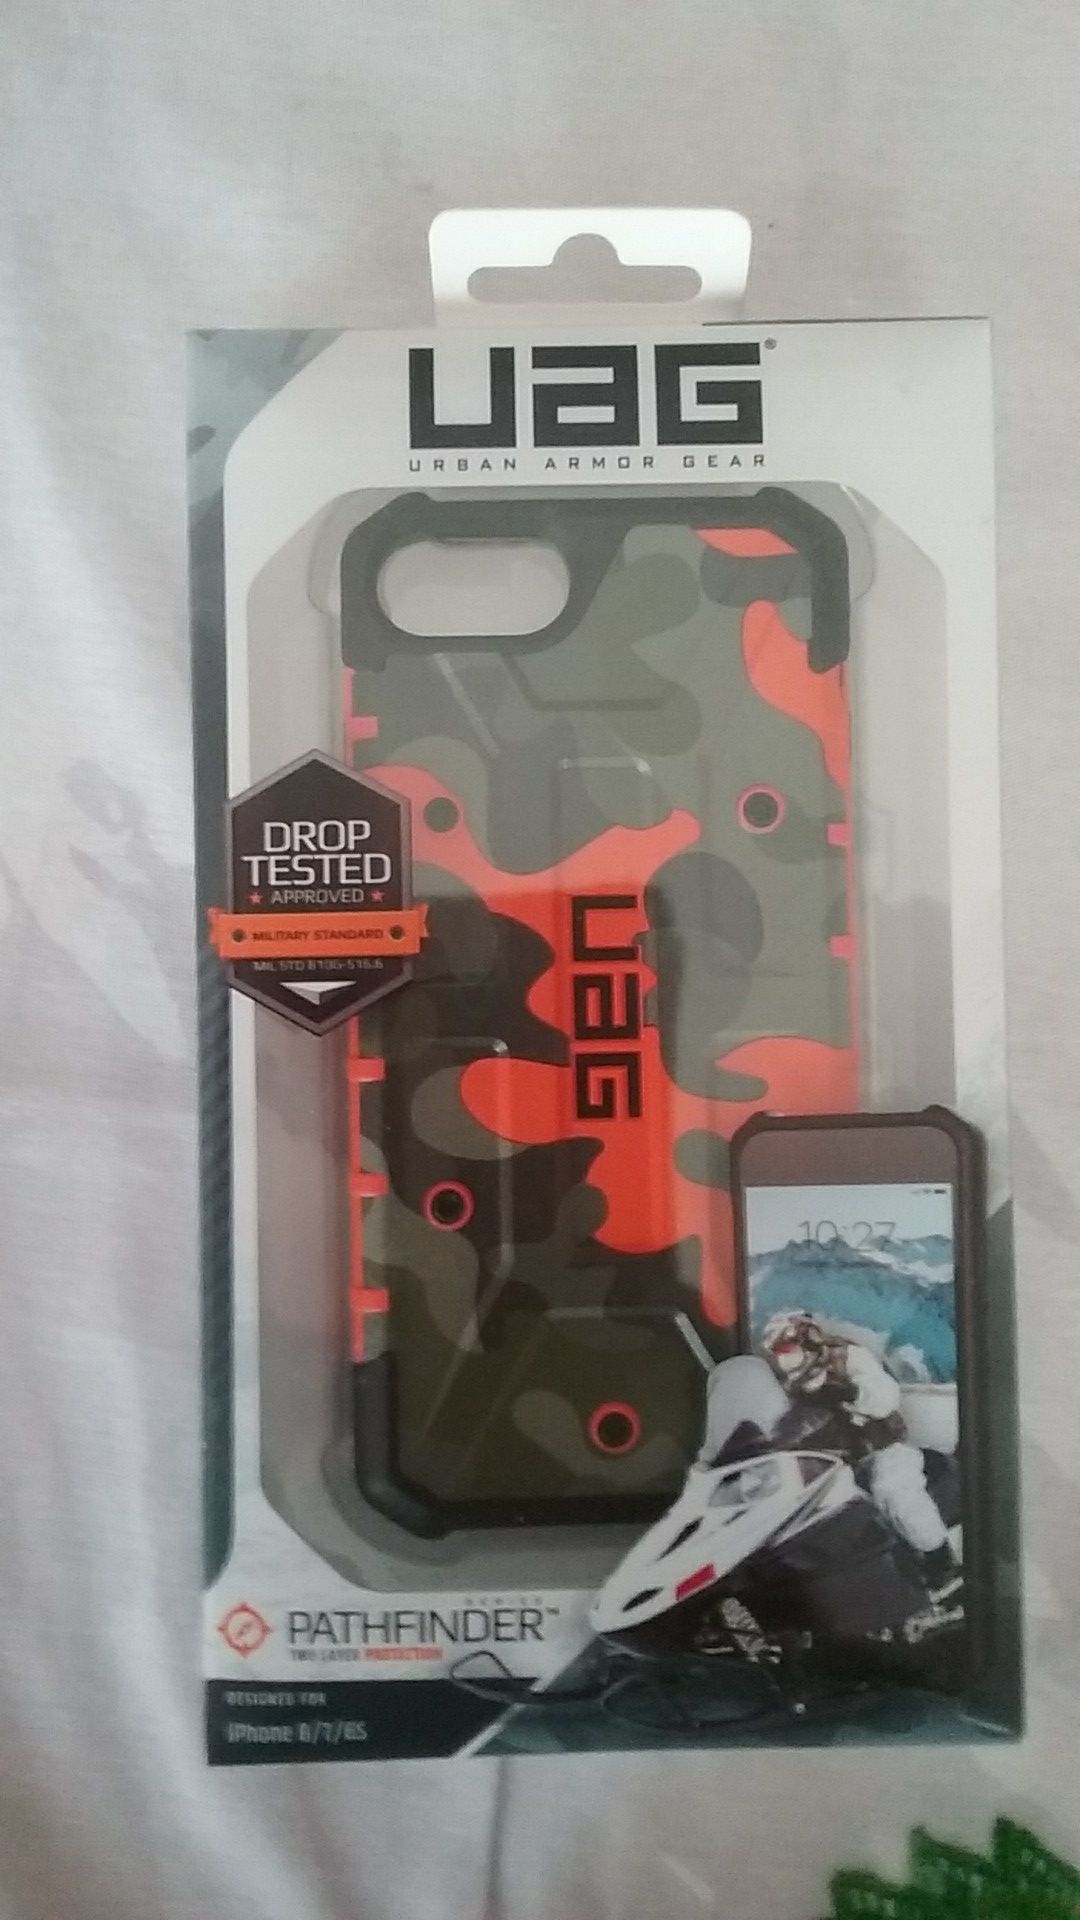 Brand NEW!!! UAG Protection iPhone 8/7/6s smartphone case